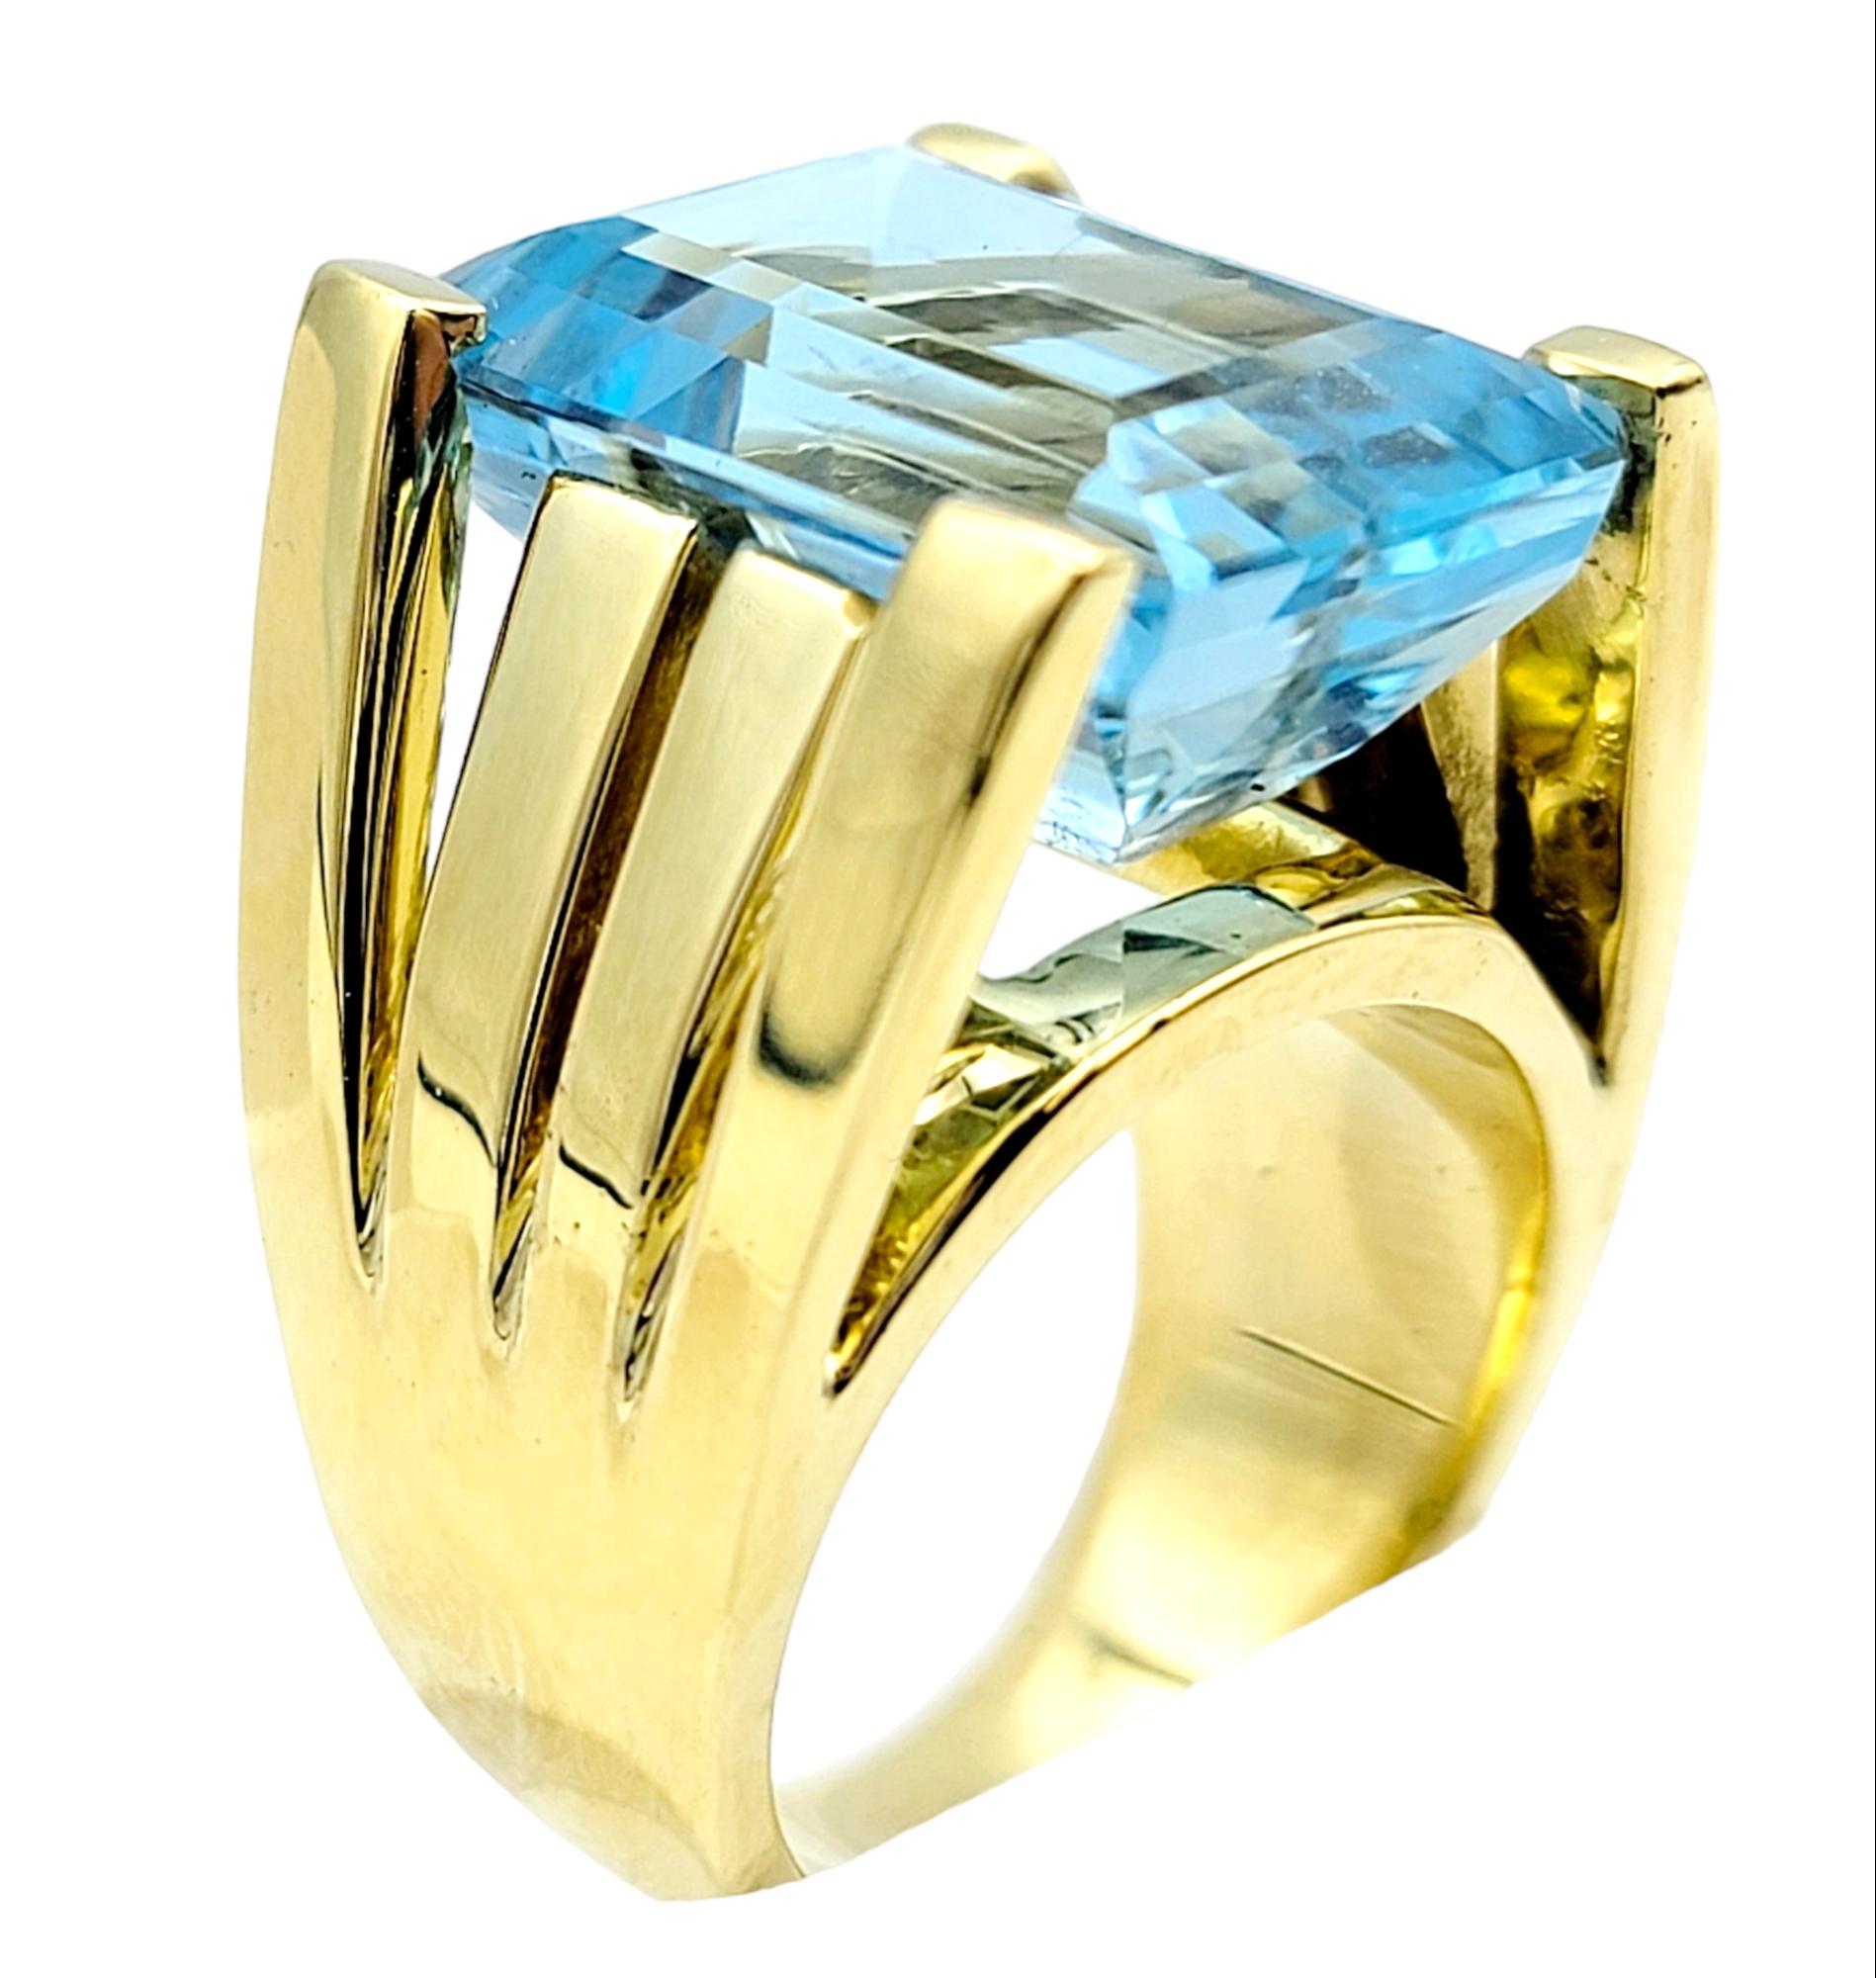 13.05 Carat Emerald Cut Aquamarine Chunky 18 Karat Yellow Gold Cocktail Ring In Good Condition For Sale In Scottsdale, AZ